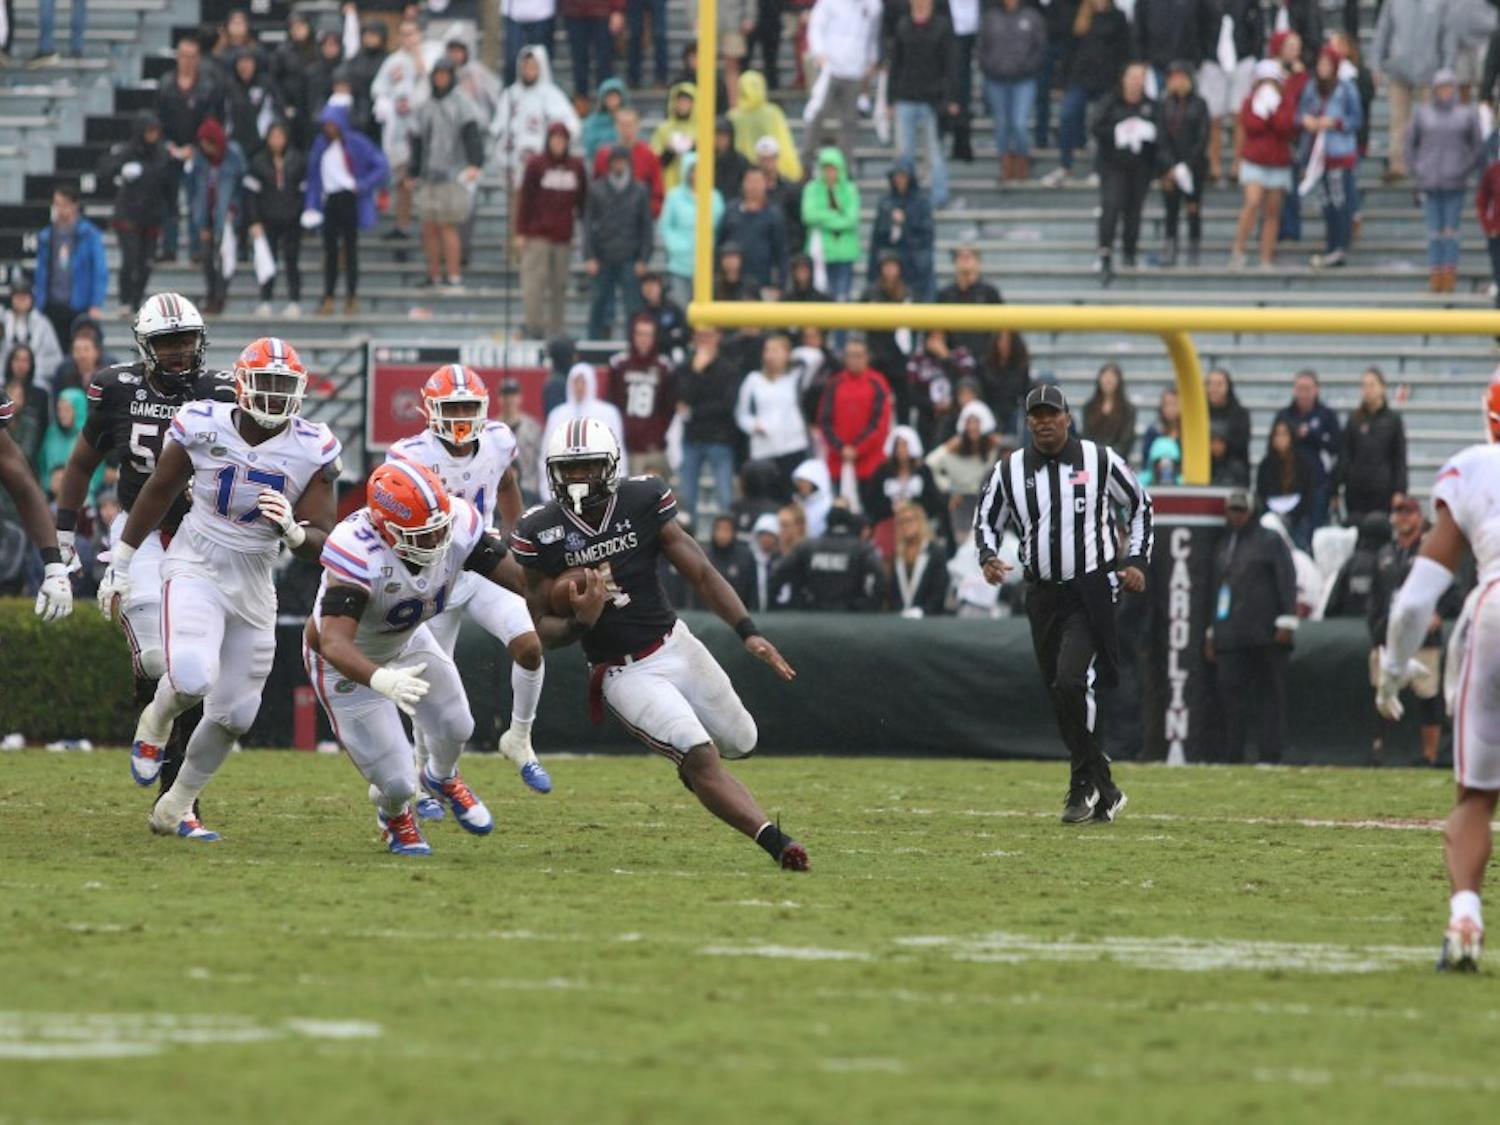 Senior running back Tavien Feaster outruns Florida defenders during the game Saturday.